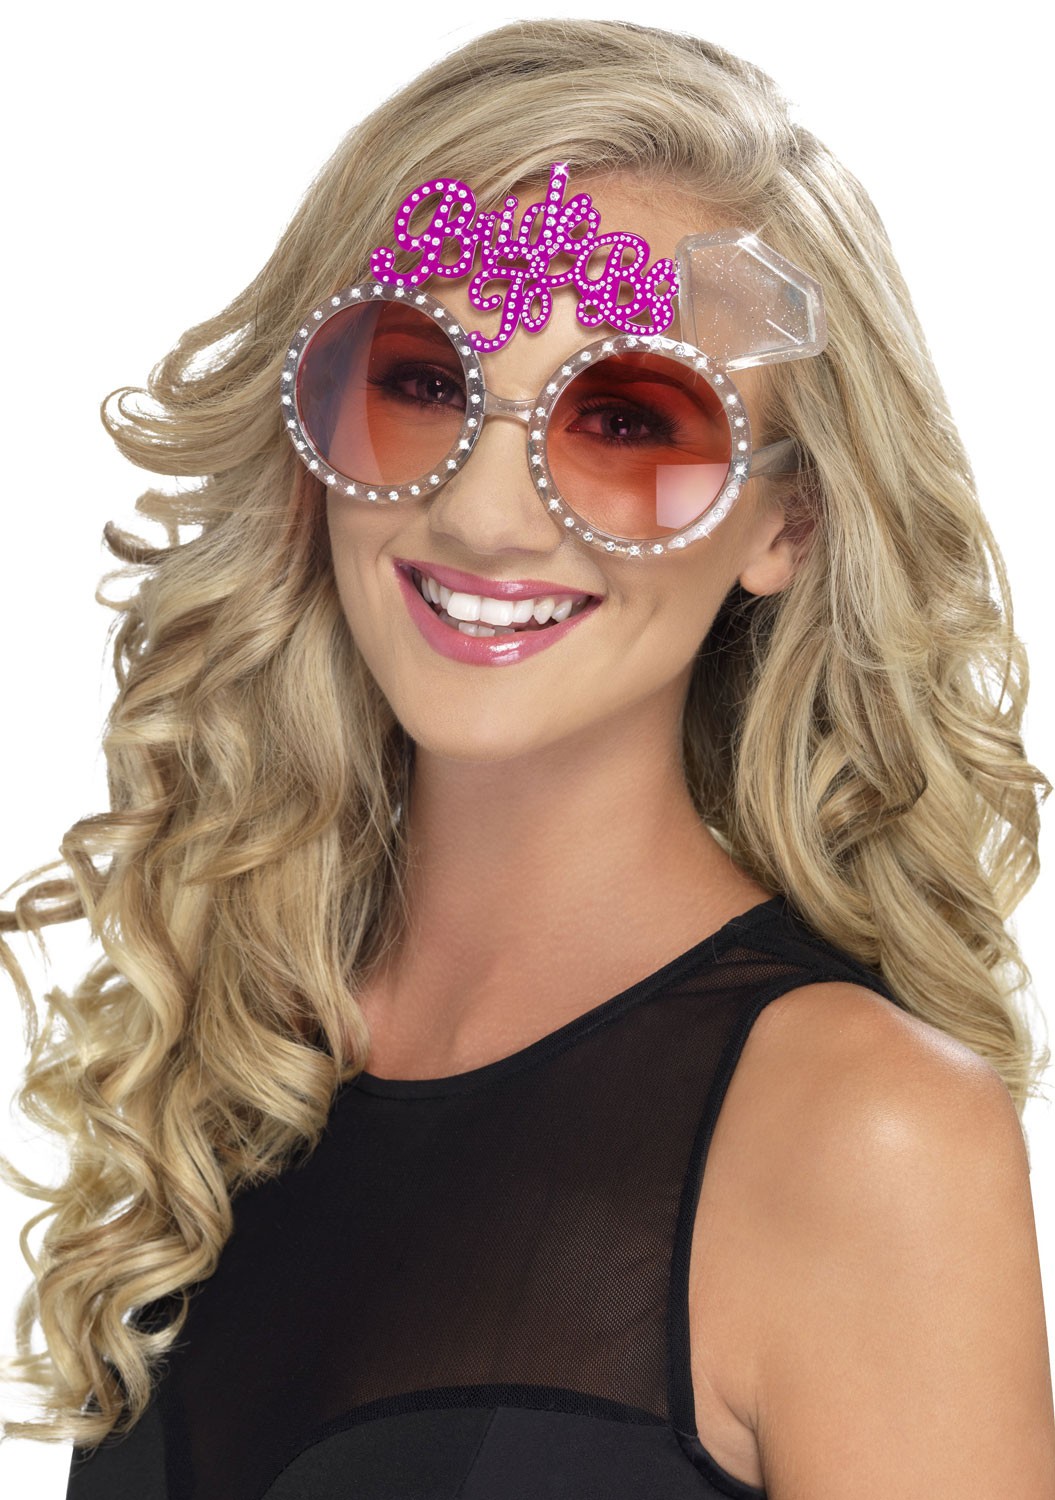 Bride to be Brille